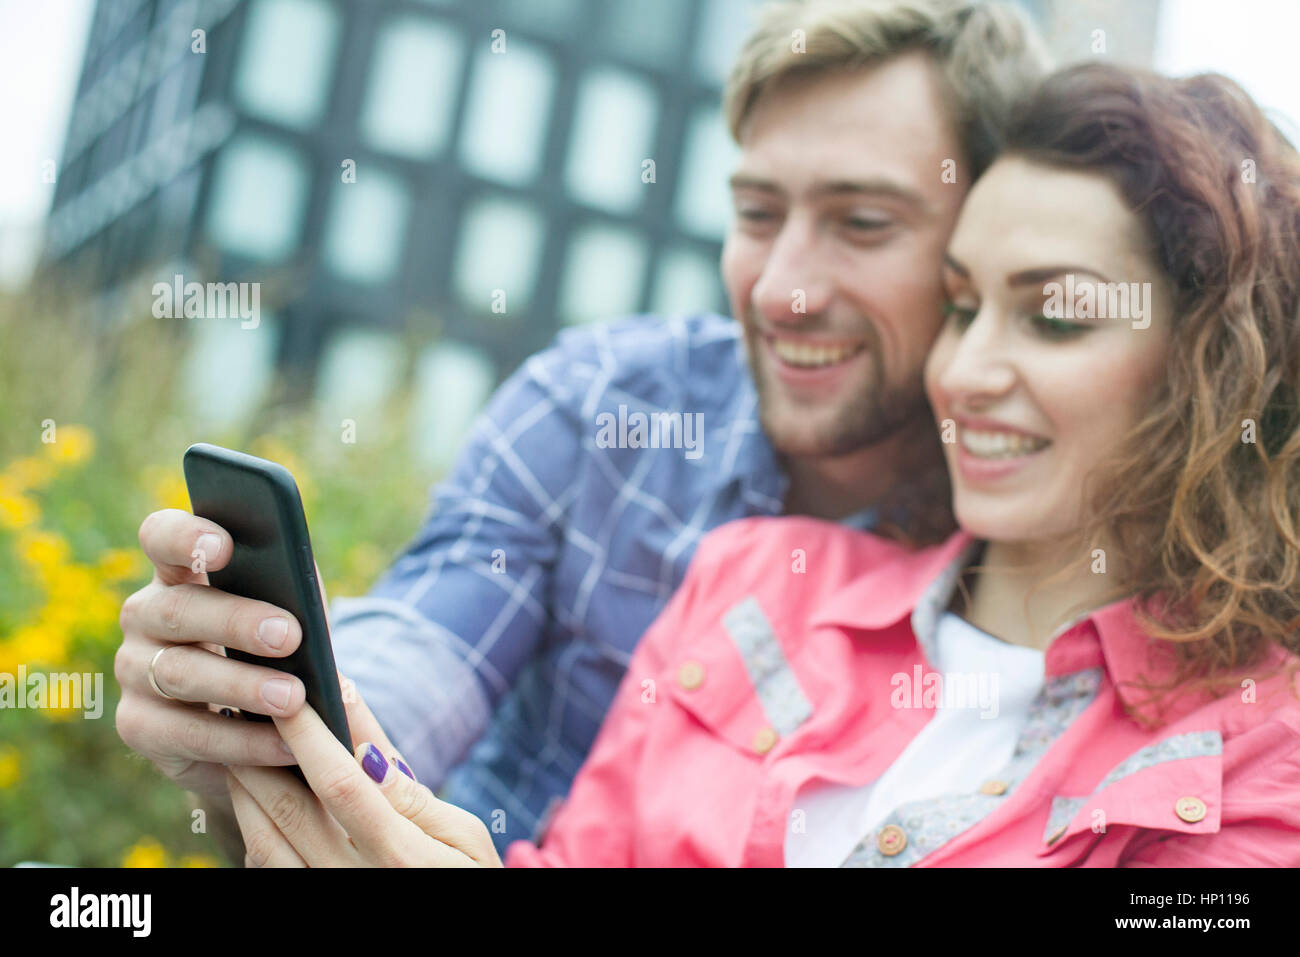 Couple using smartphone together outdoors Stock Photo